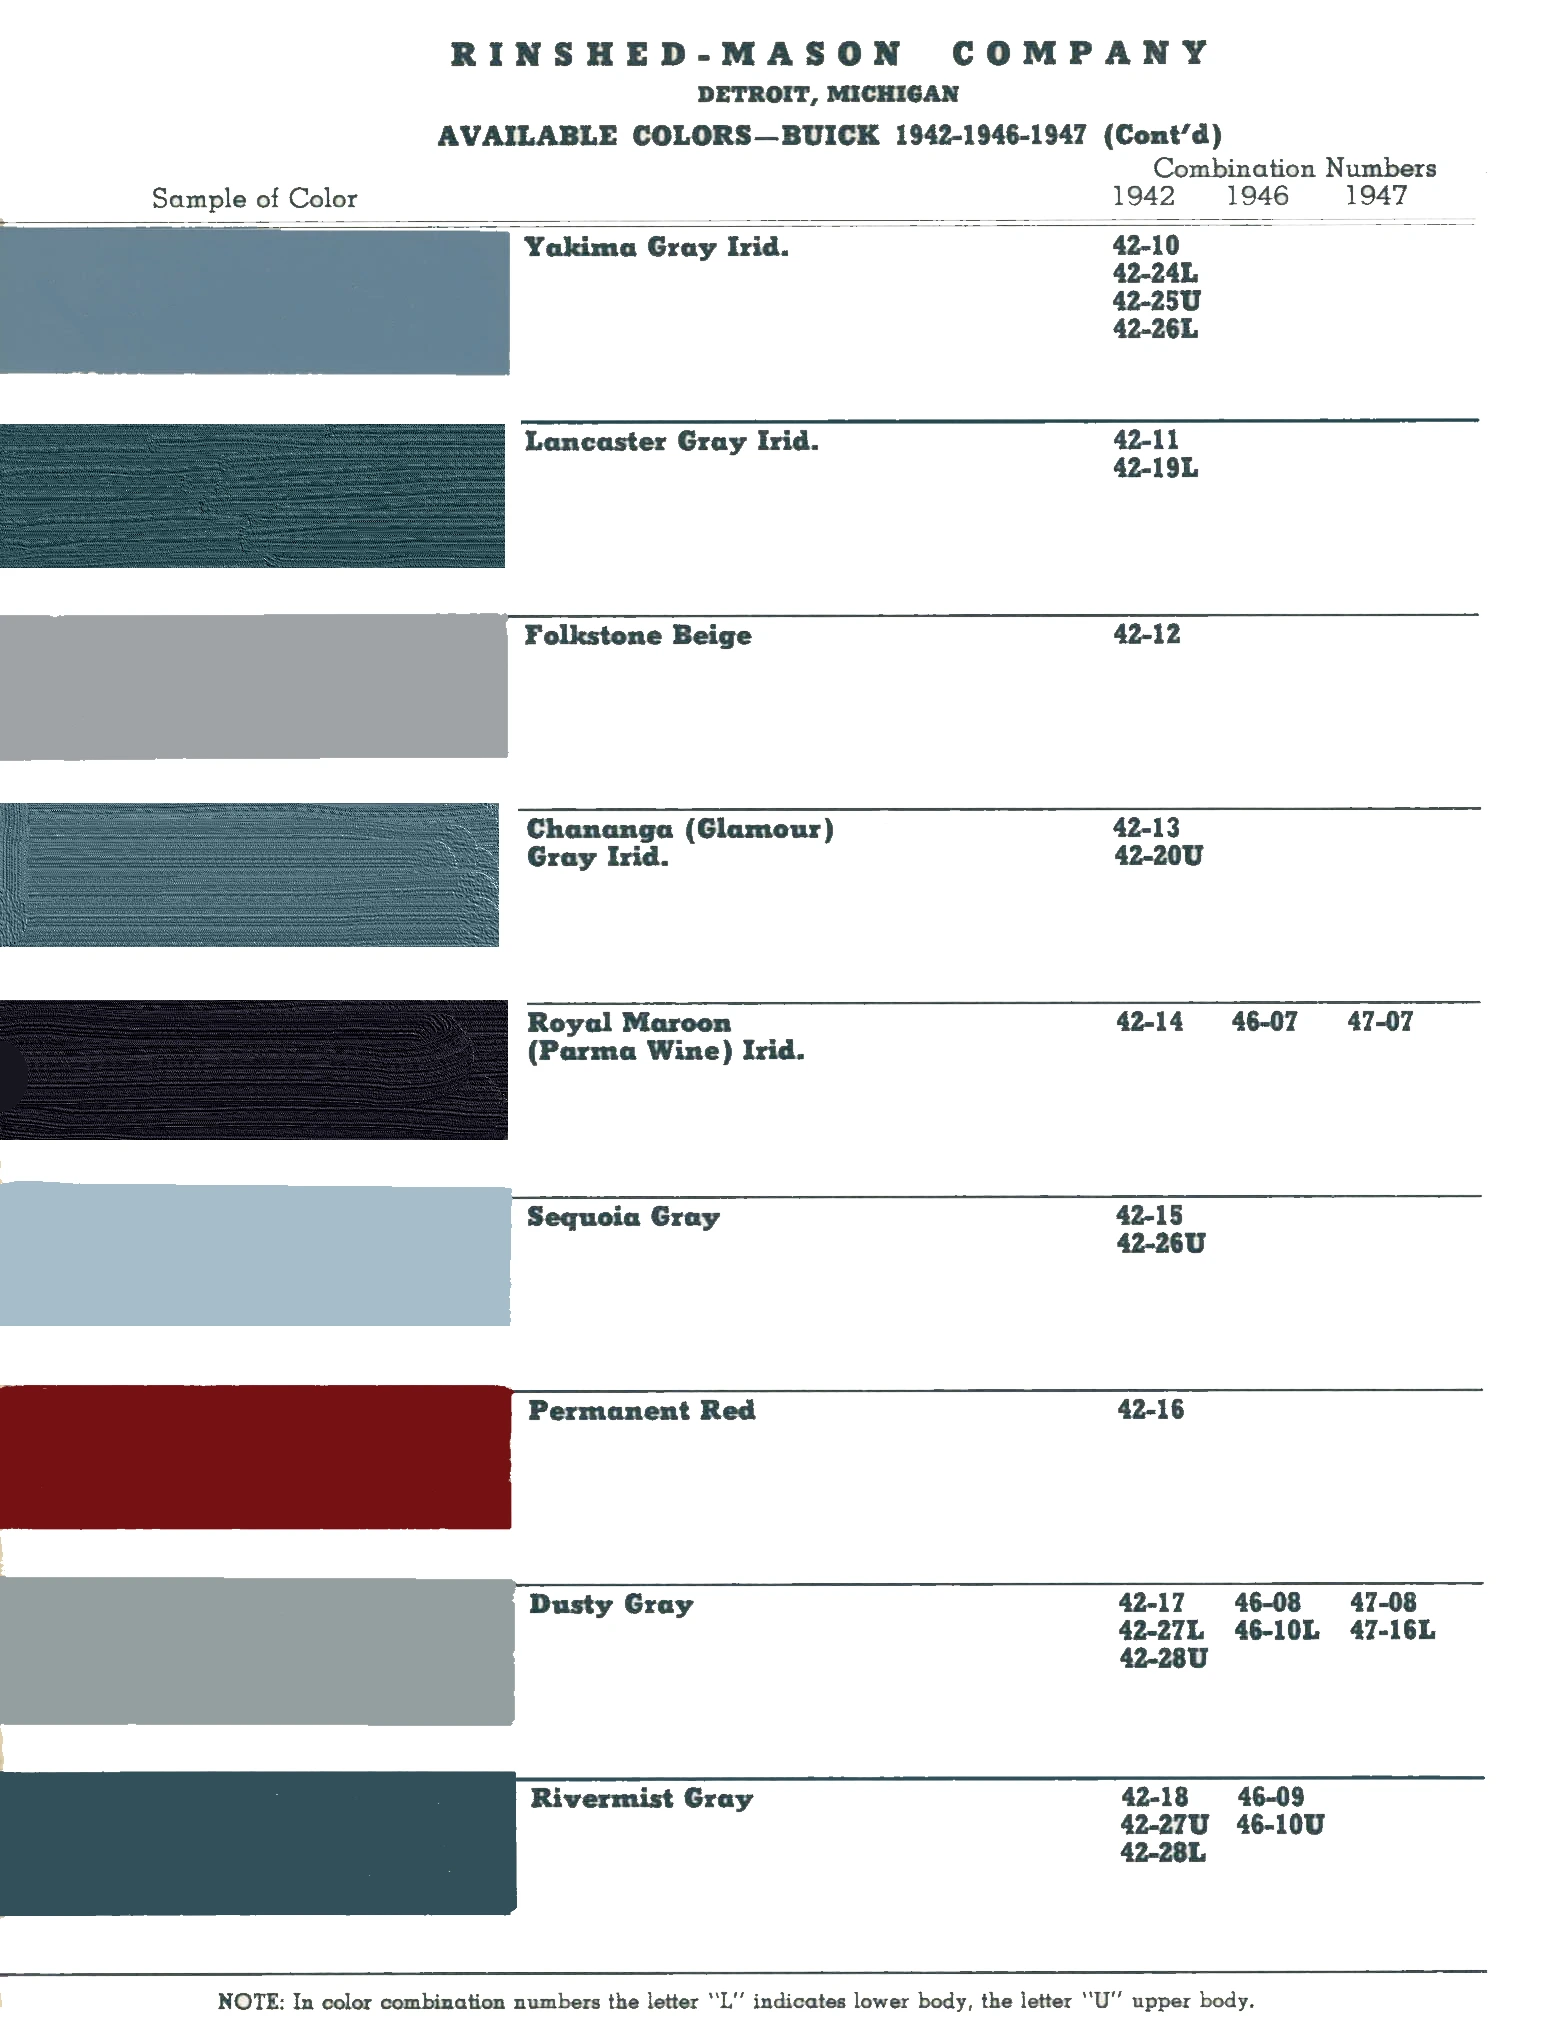 Combined Color Charts by Mfg's during ww2, Buick model Paint colors